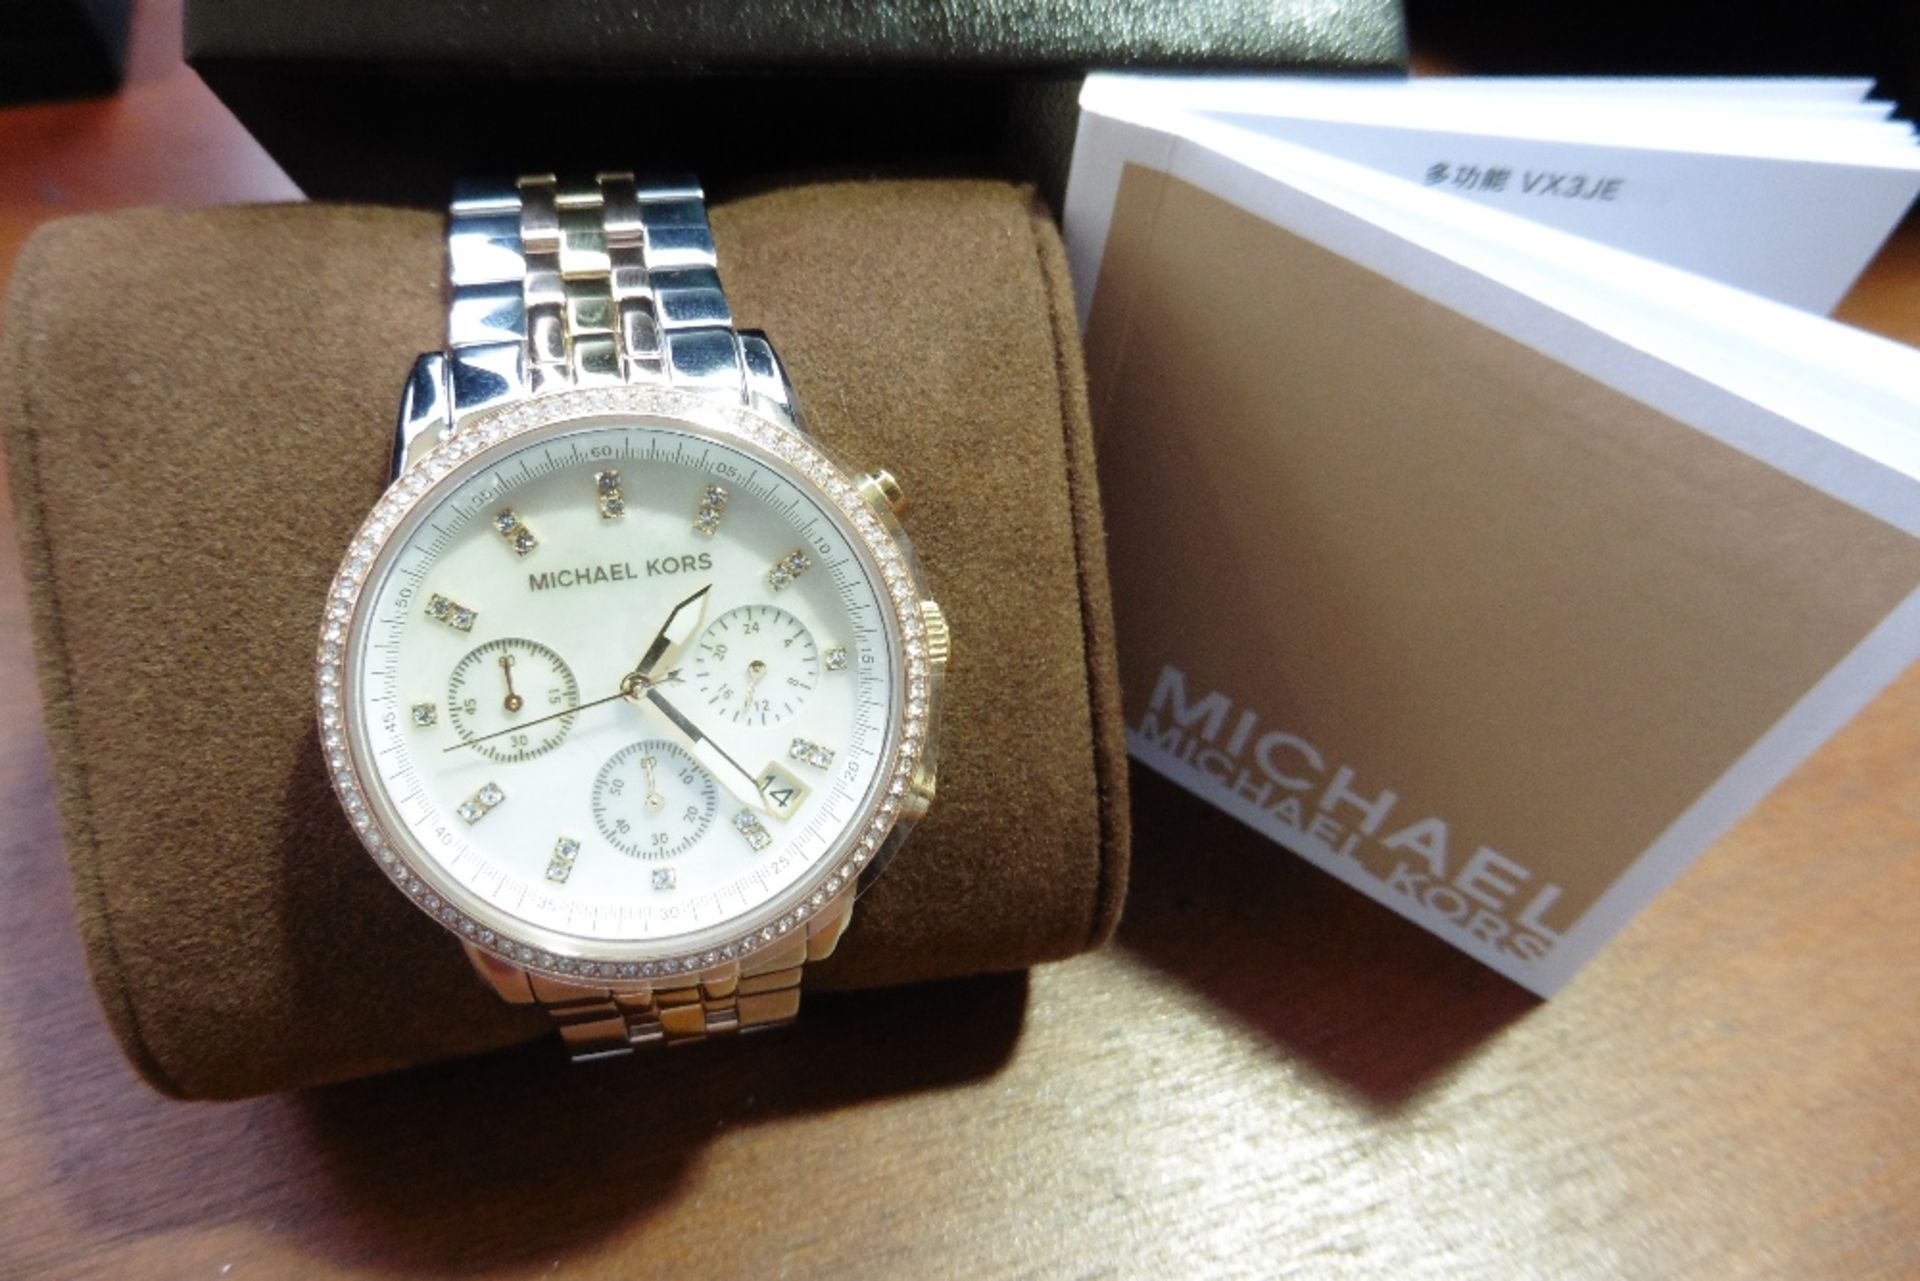 Ritz collection from Michael Kors, model number MK5650, stainless steel with tri- colour strap.